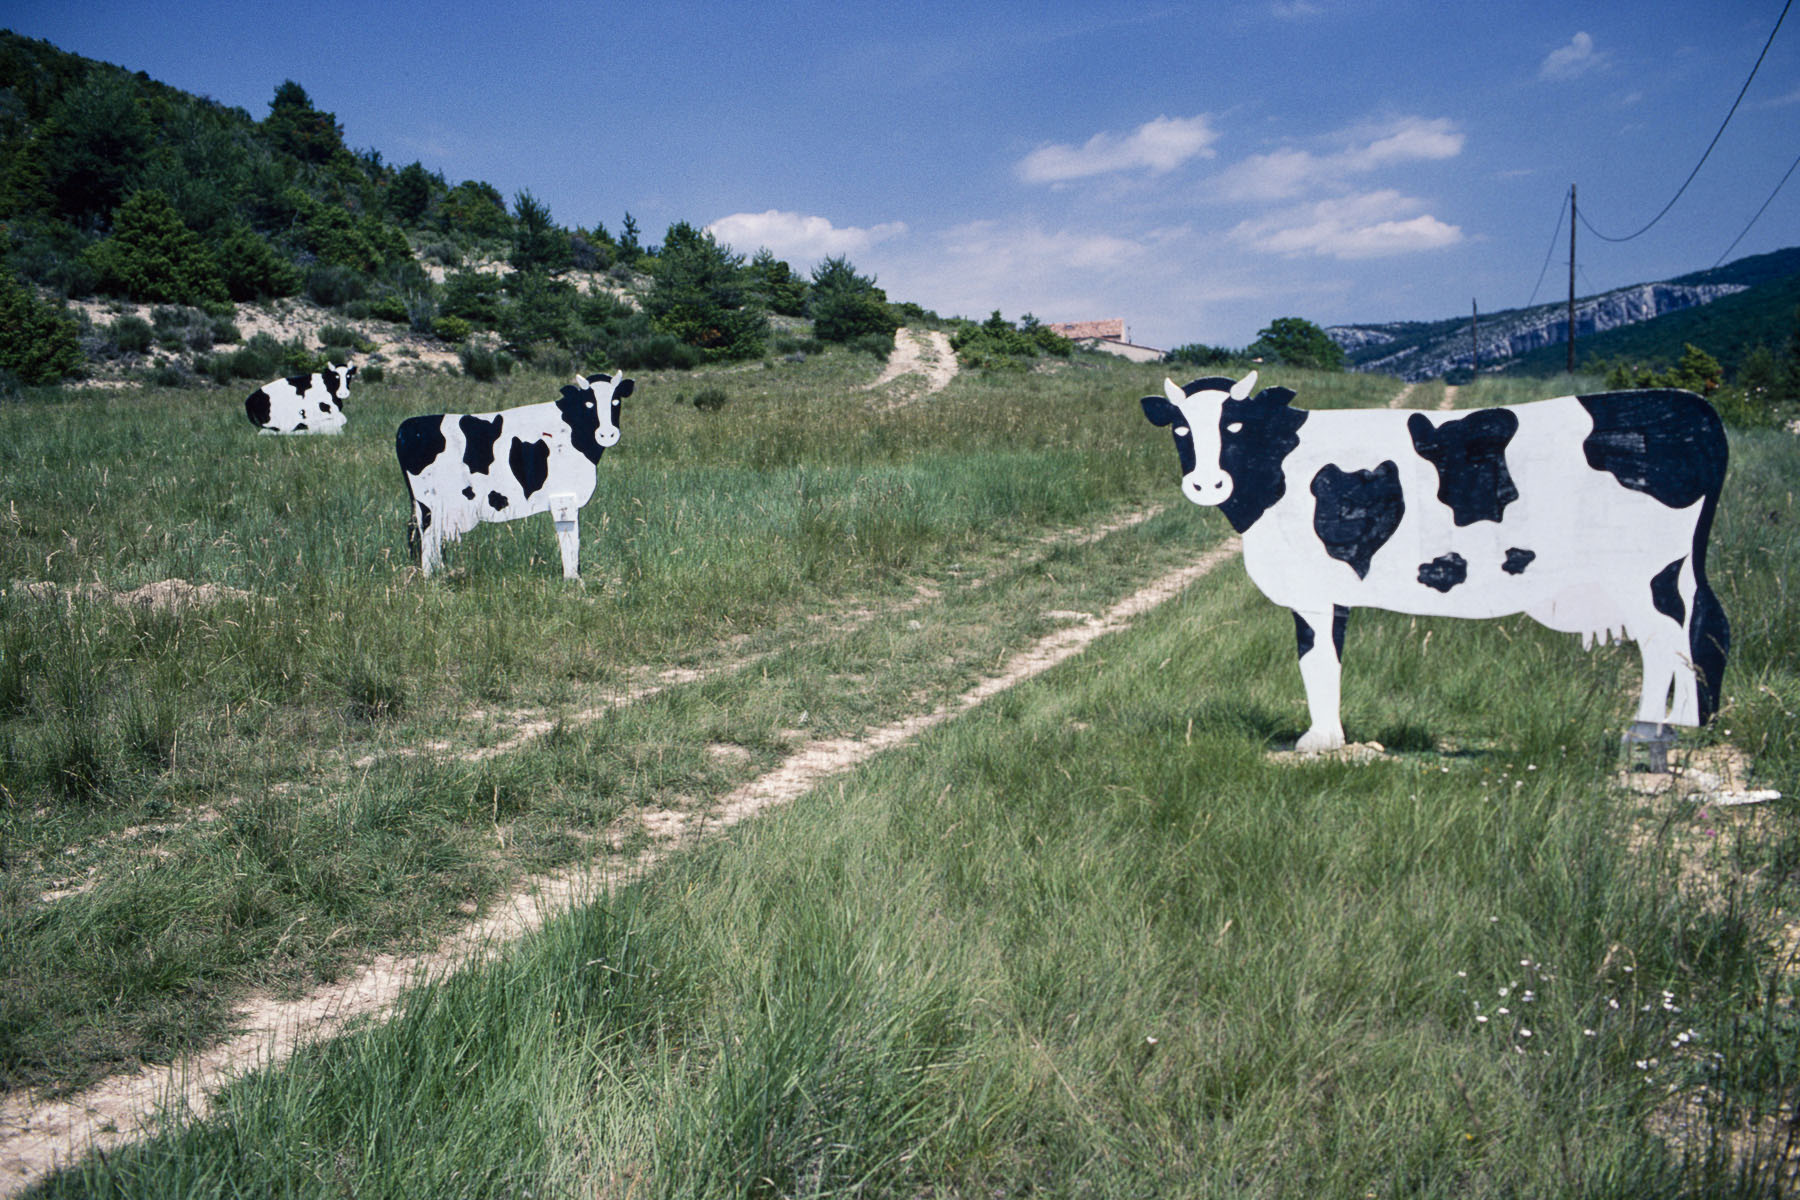 Billboards representing milk cows near the Gorges of the Verdon. 2000